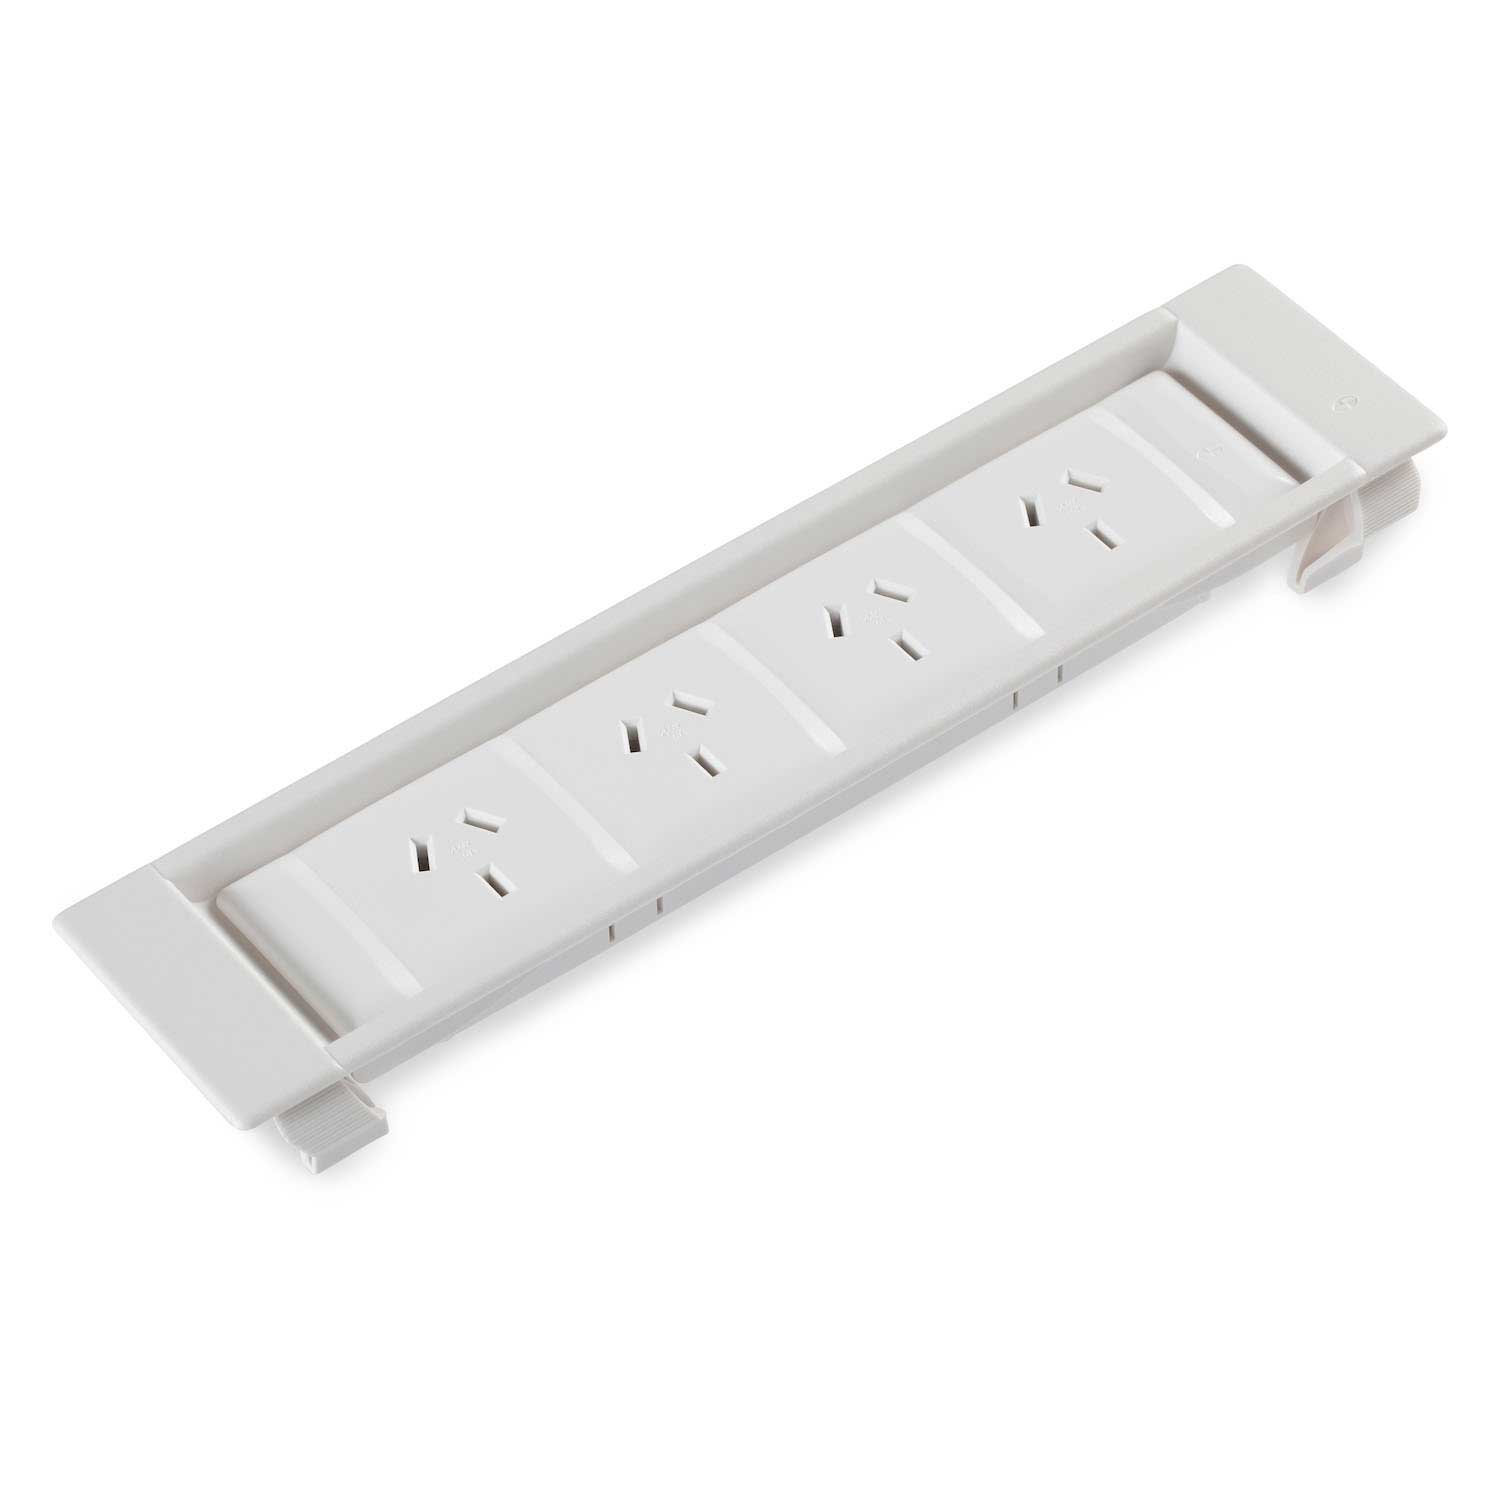 SW1714 – Quad GPO Mounted In Thick Panel Bracket